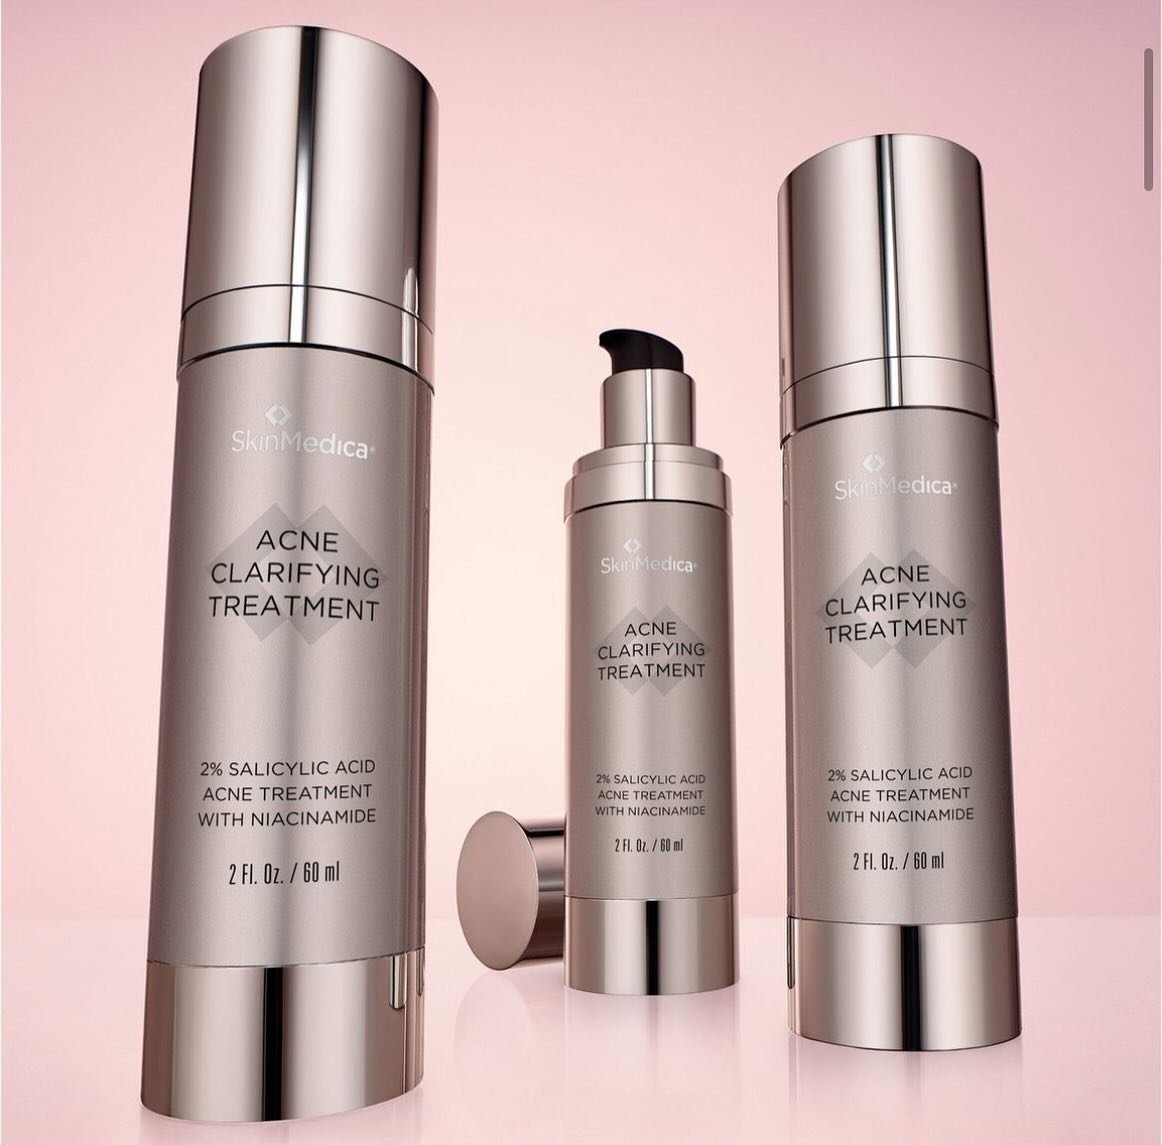 NEW NEW NEW! 🙌✨ Introducing Skinmedica&rsquo;s latest breakthrough in skincare: The NEW Acne Clarifying Treatment! Get ready to be amazed by its remarkable clinical results.

👋 Say goodbye to acne with Skinmedica&rsquo;s Acne Clarifying Treatment, 